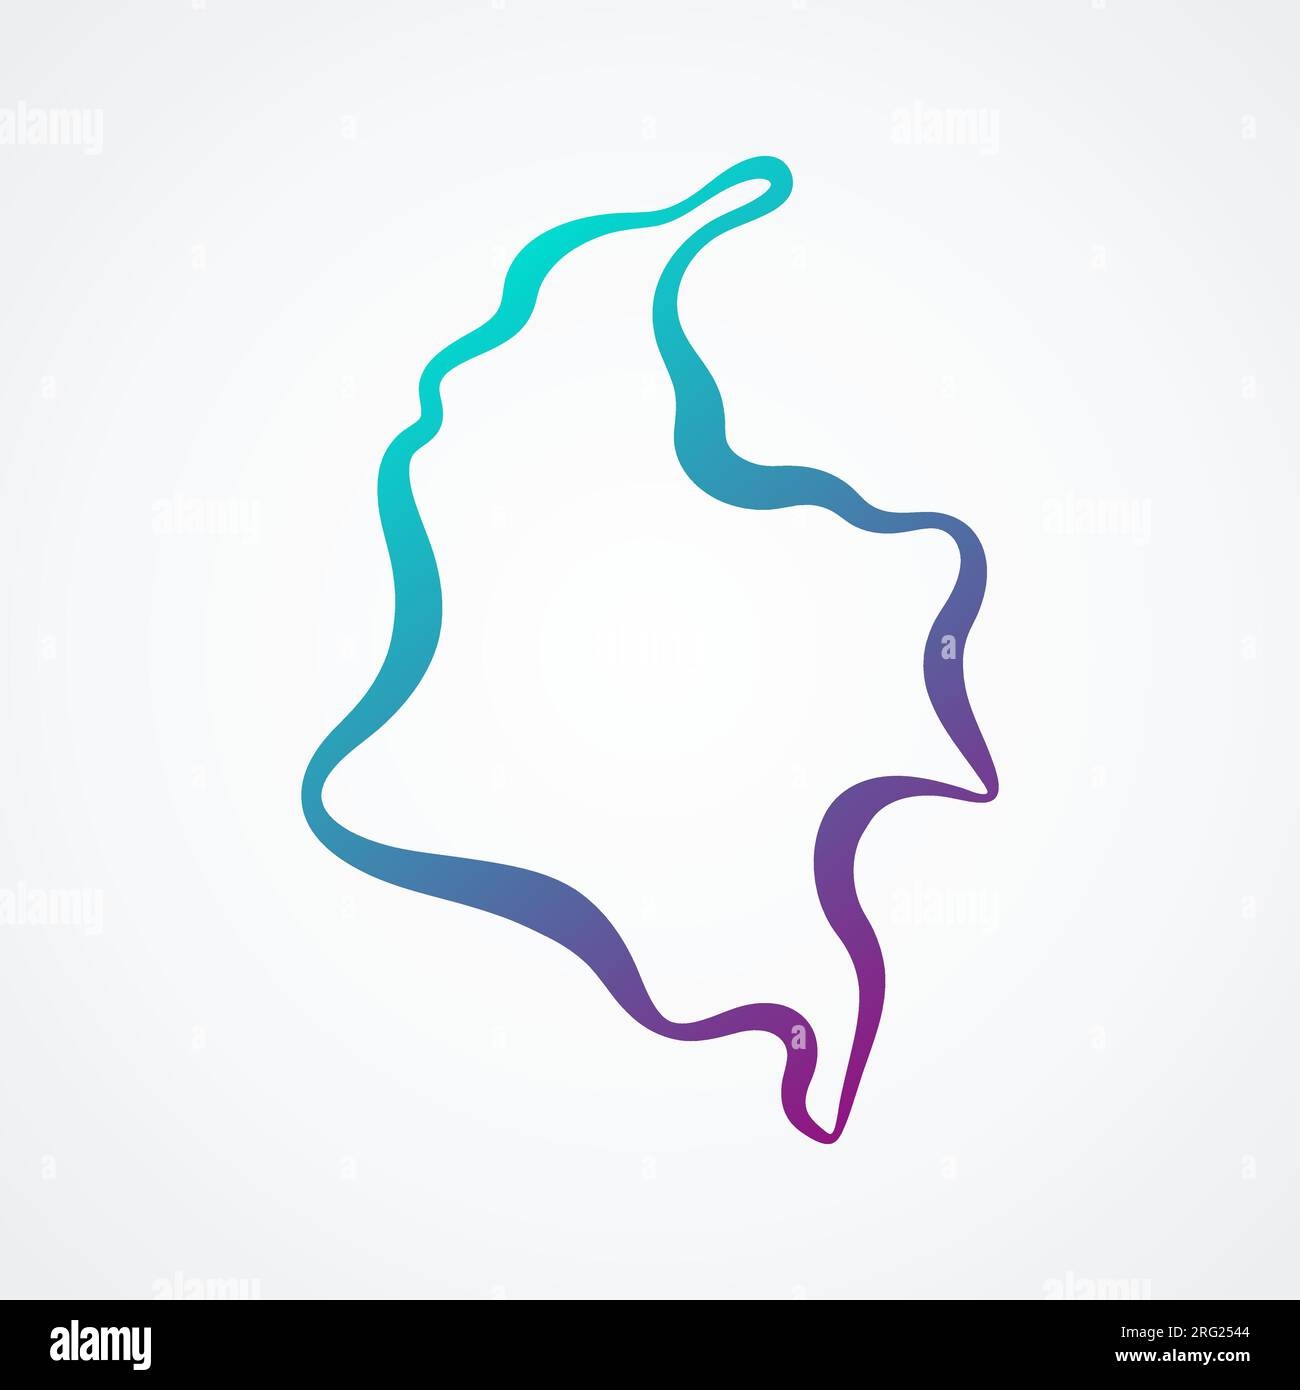 Outline map of Colombia with blue-purple gradient. Stock Vector